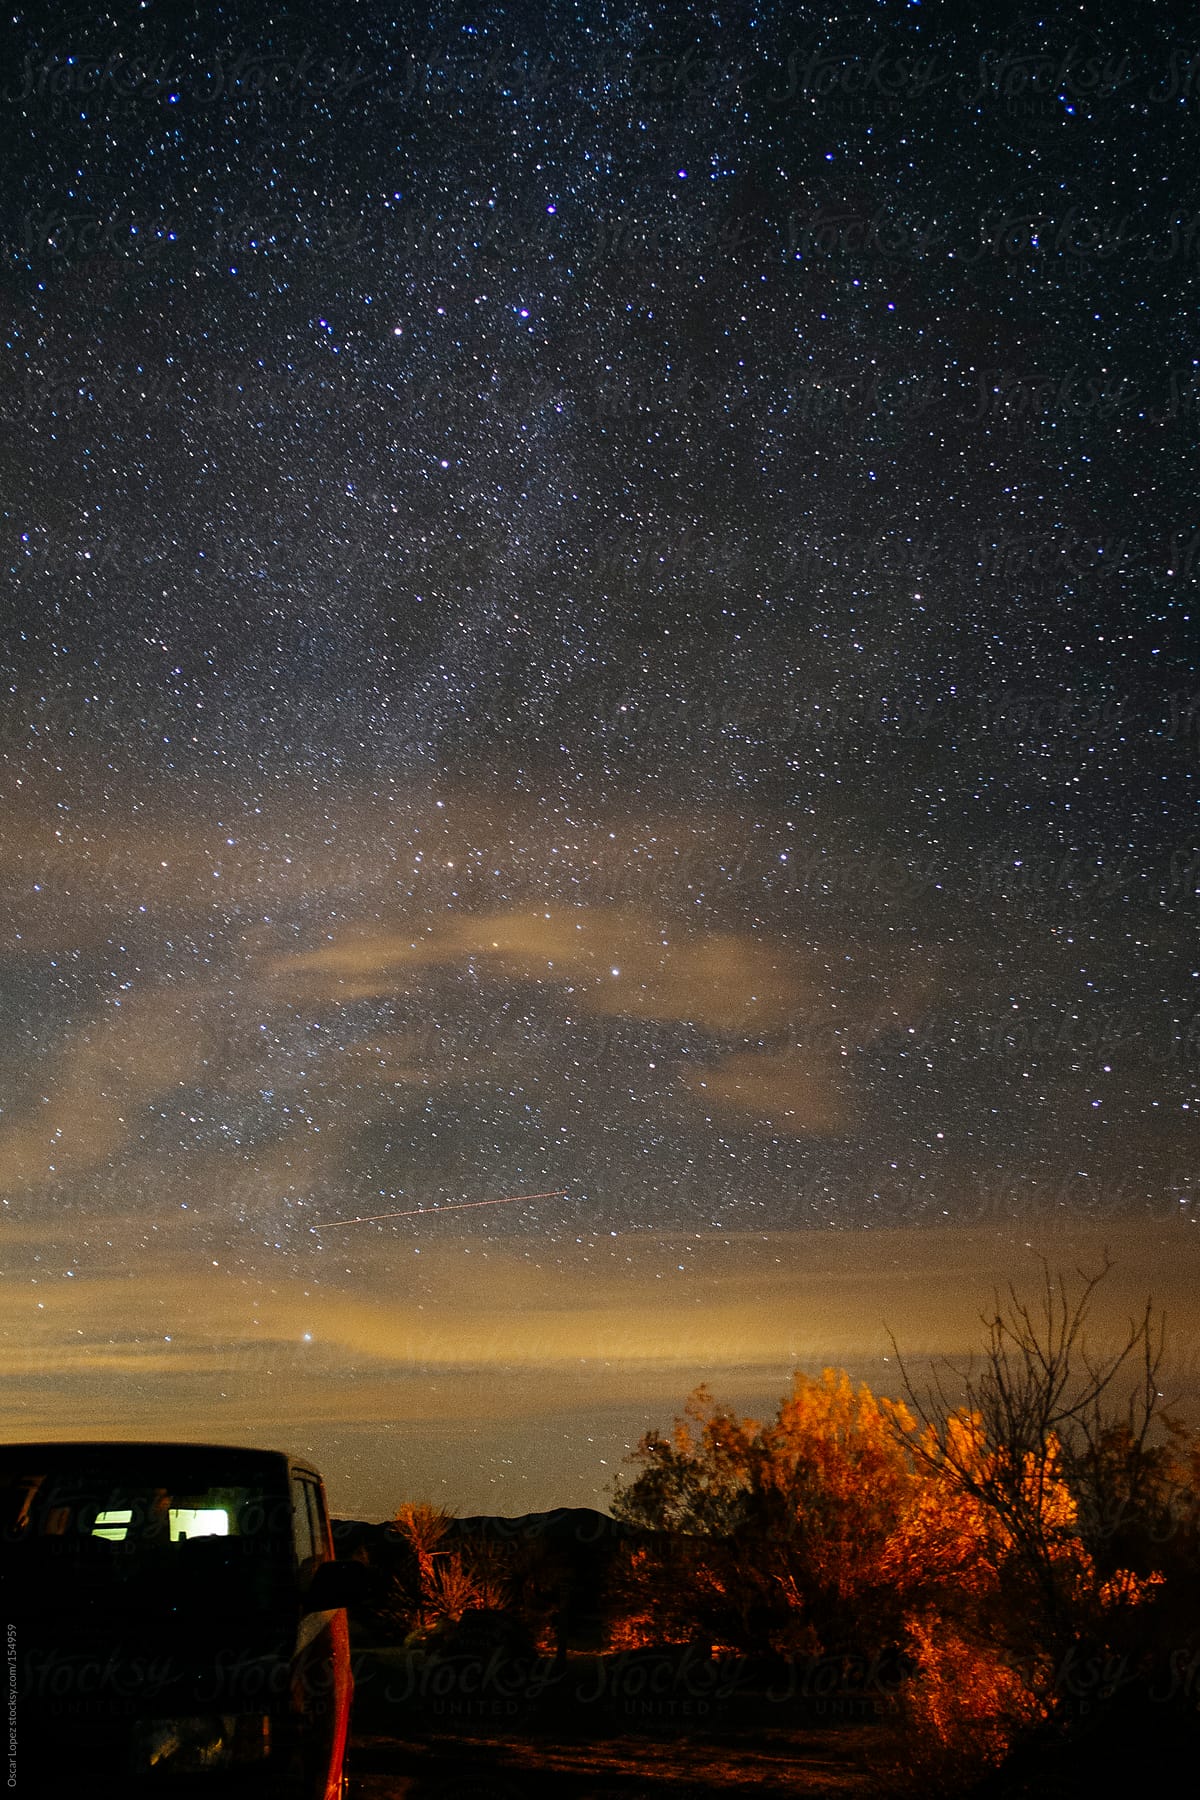 Car in front of milky way